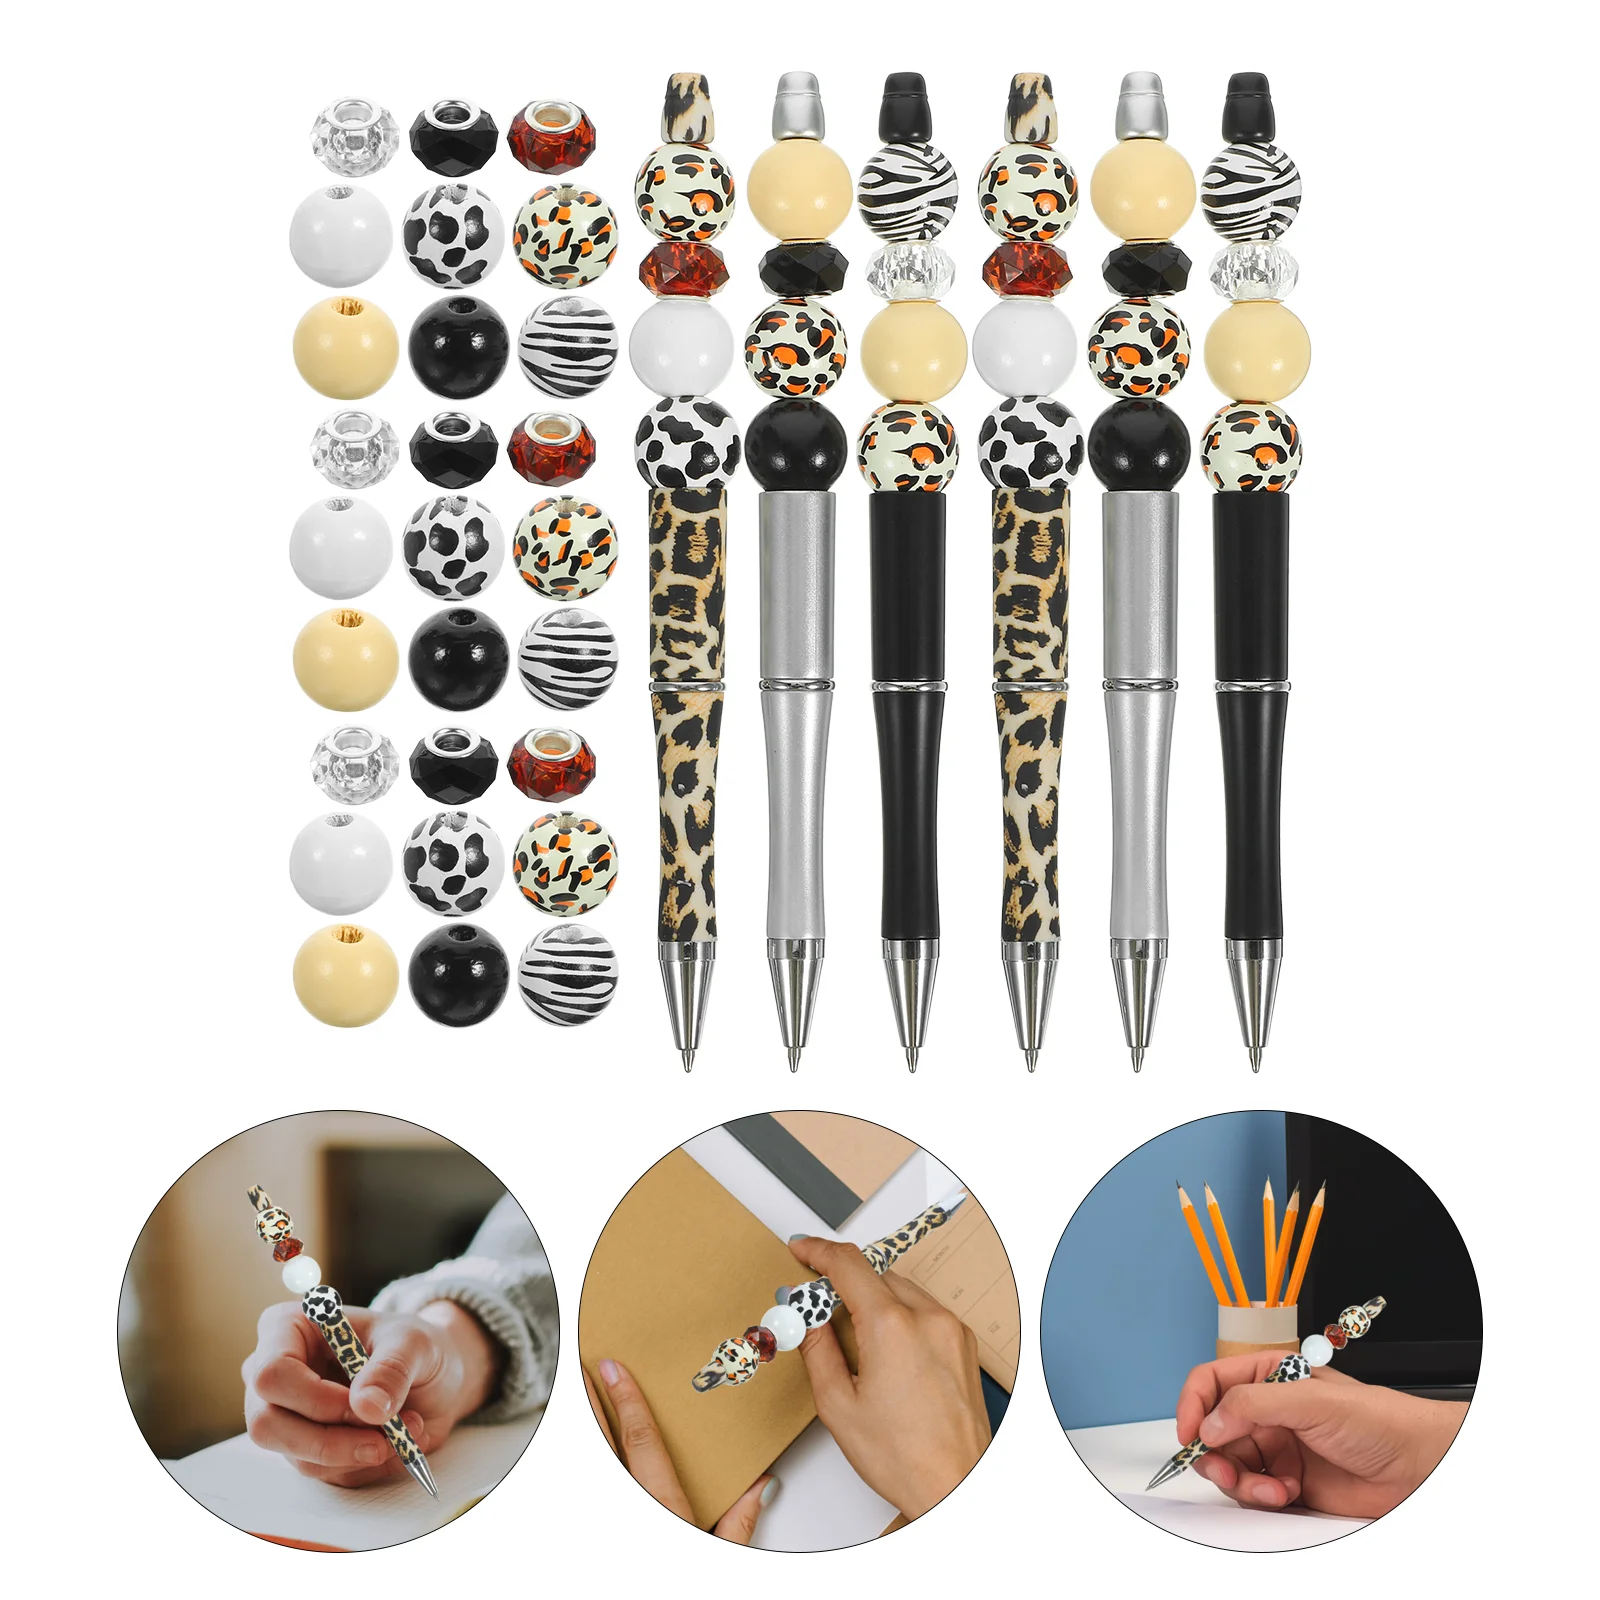 12 Pcs Plastic Pens Beaded Craft Plastic Beadable Kit Bulk Adult Accessory with Beads Silicone Portable 10meter floral leopard camouflage print elastic bands rubber pants elastic cord for headband waist belt clothing craft accessory